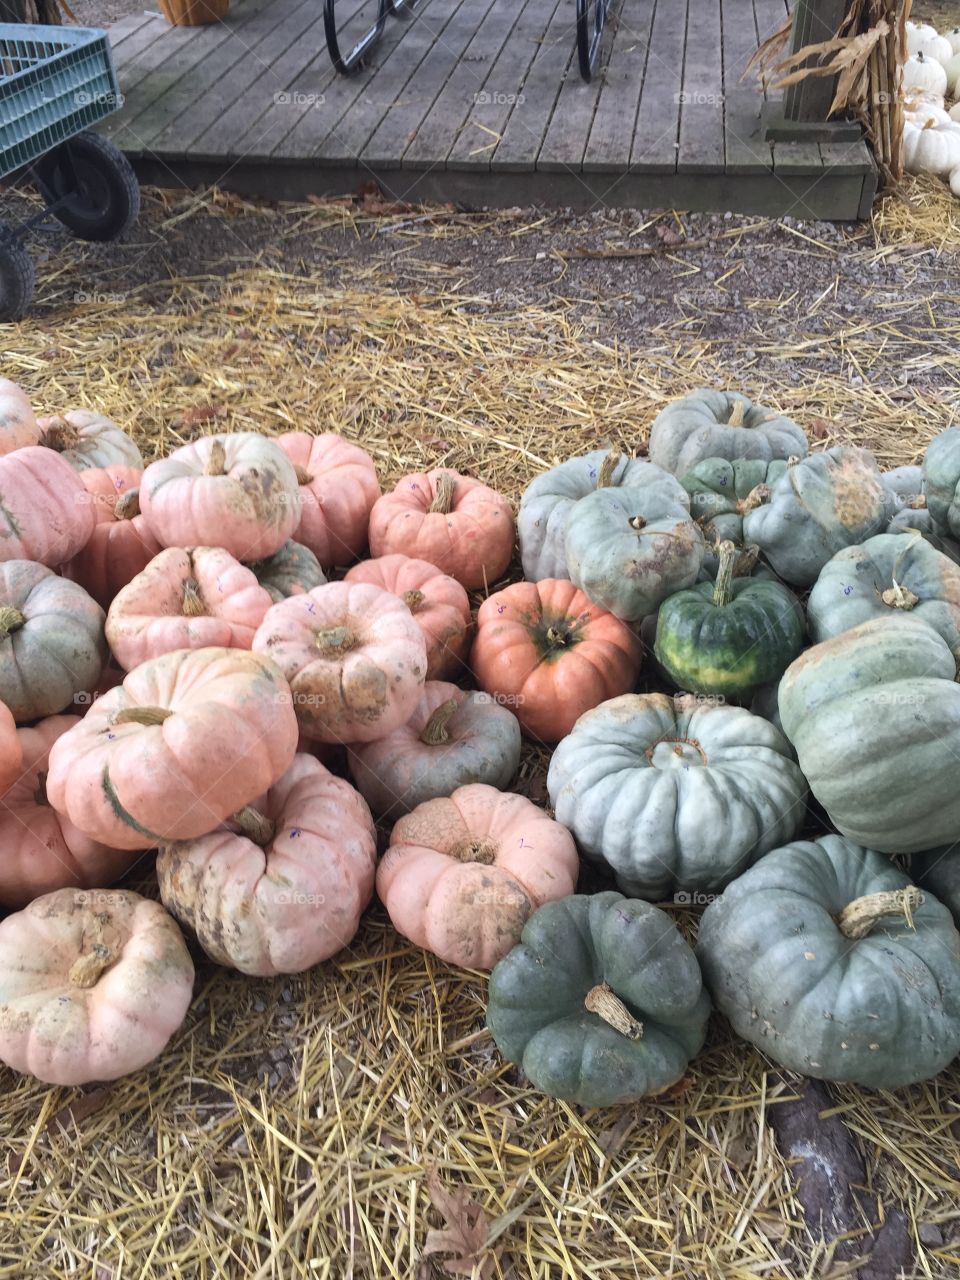 Pumpkins come in all shapes and sizes